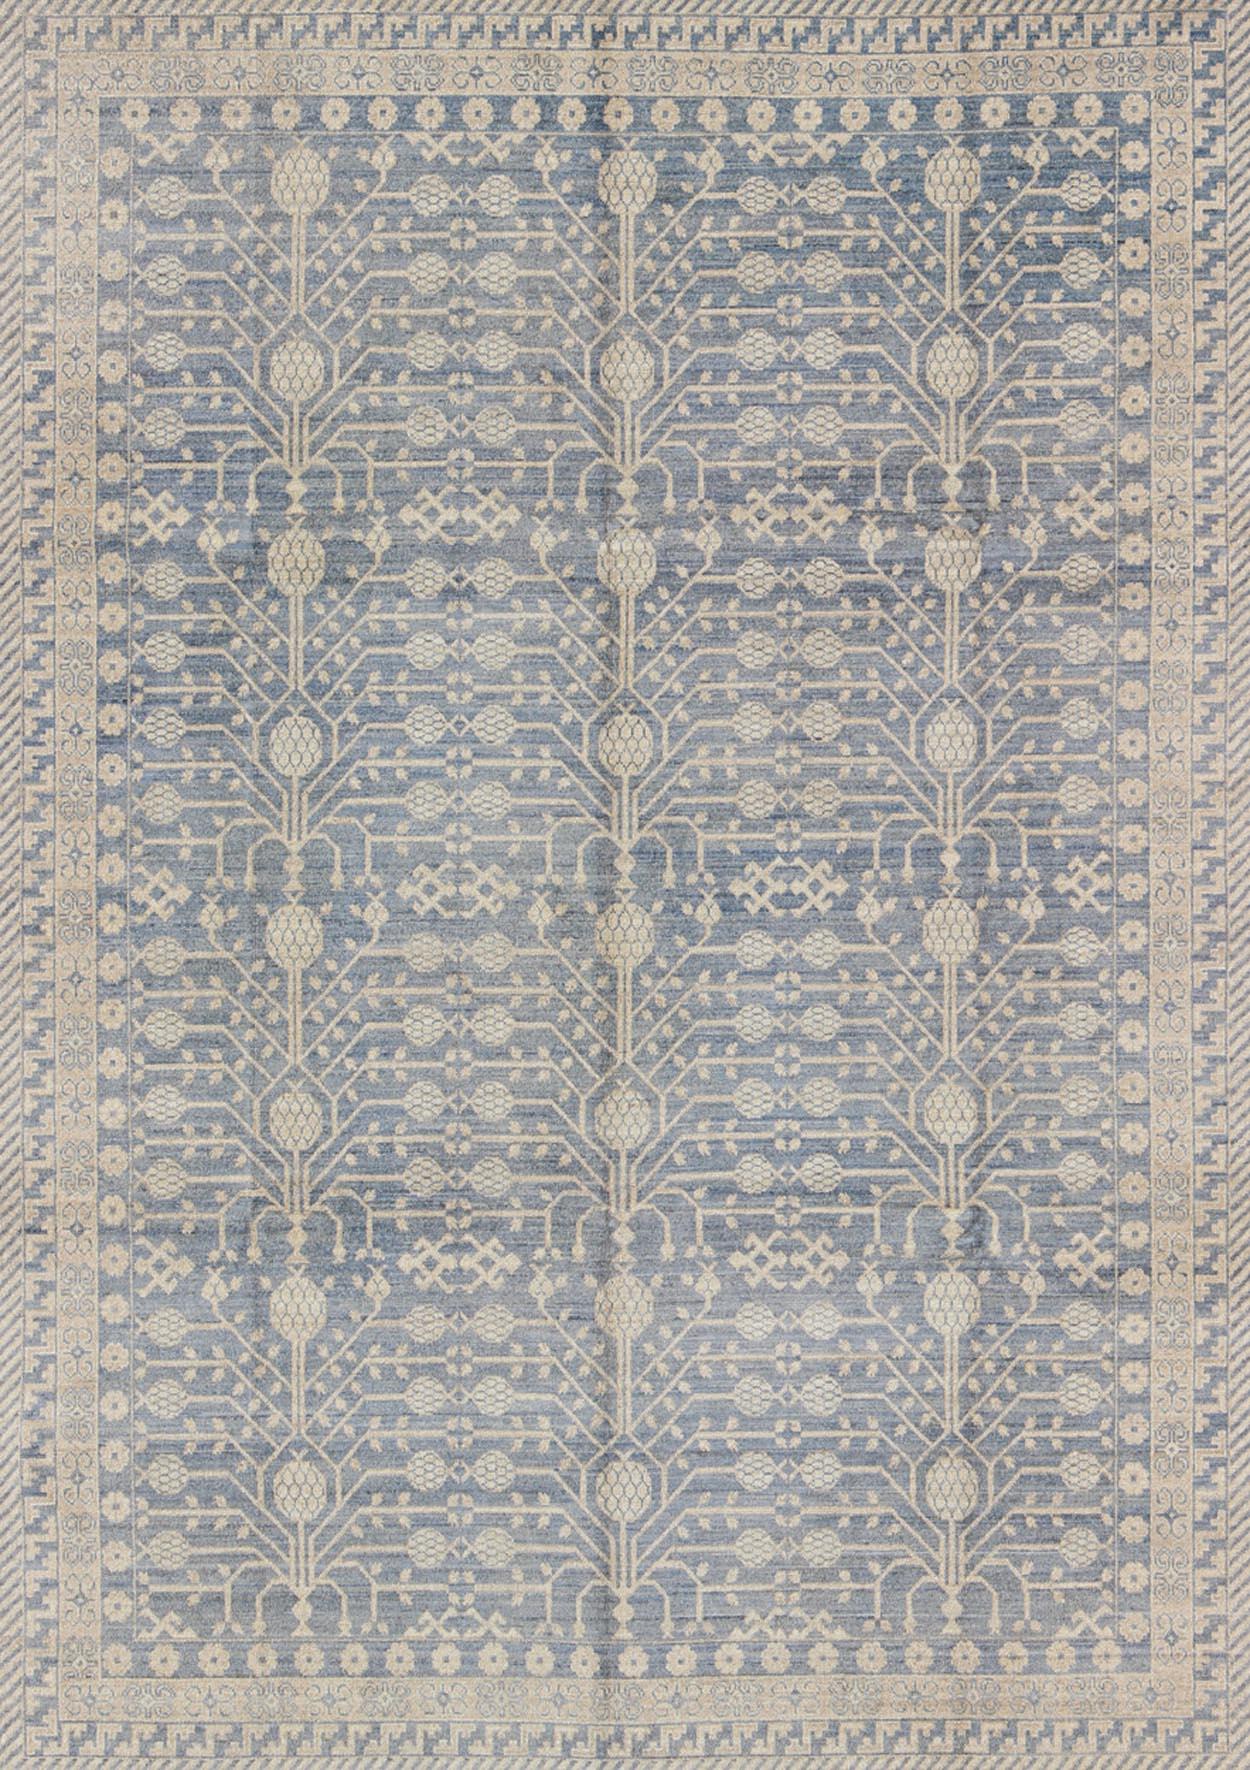 Hand-Knotted Khotan Design Rug with All-Over Pomegranate Pattern in Blue, Tan & Taupe For Sale